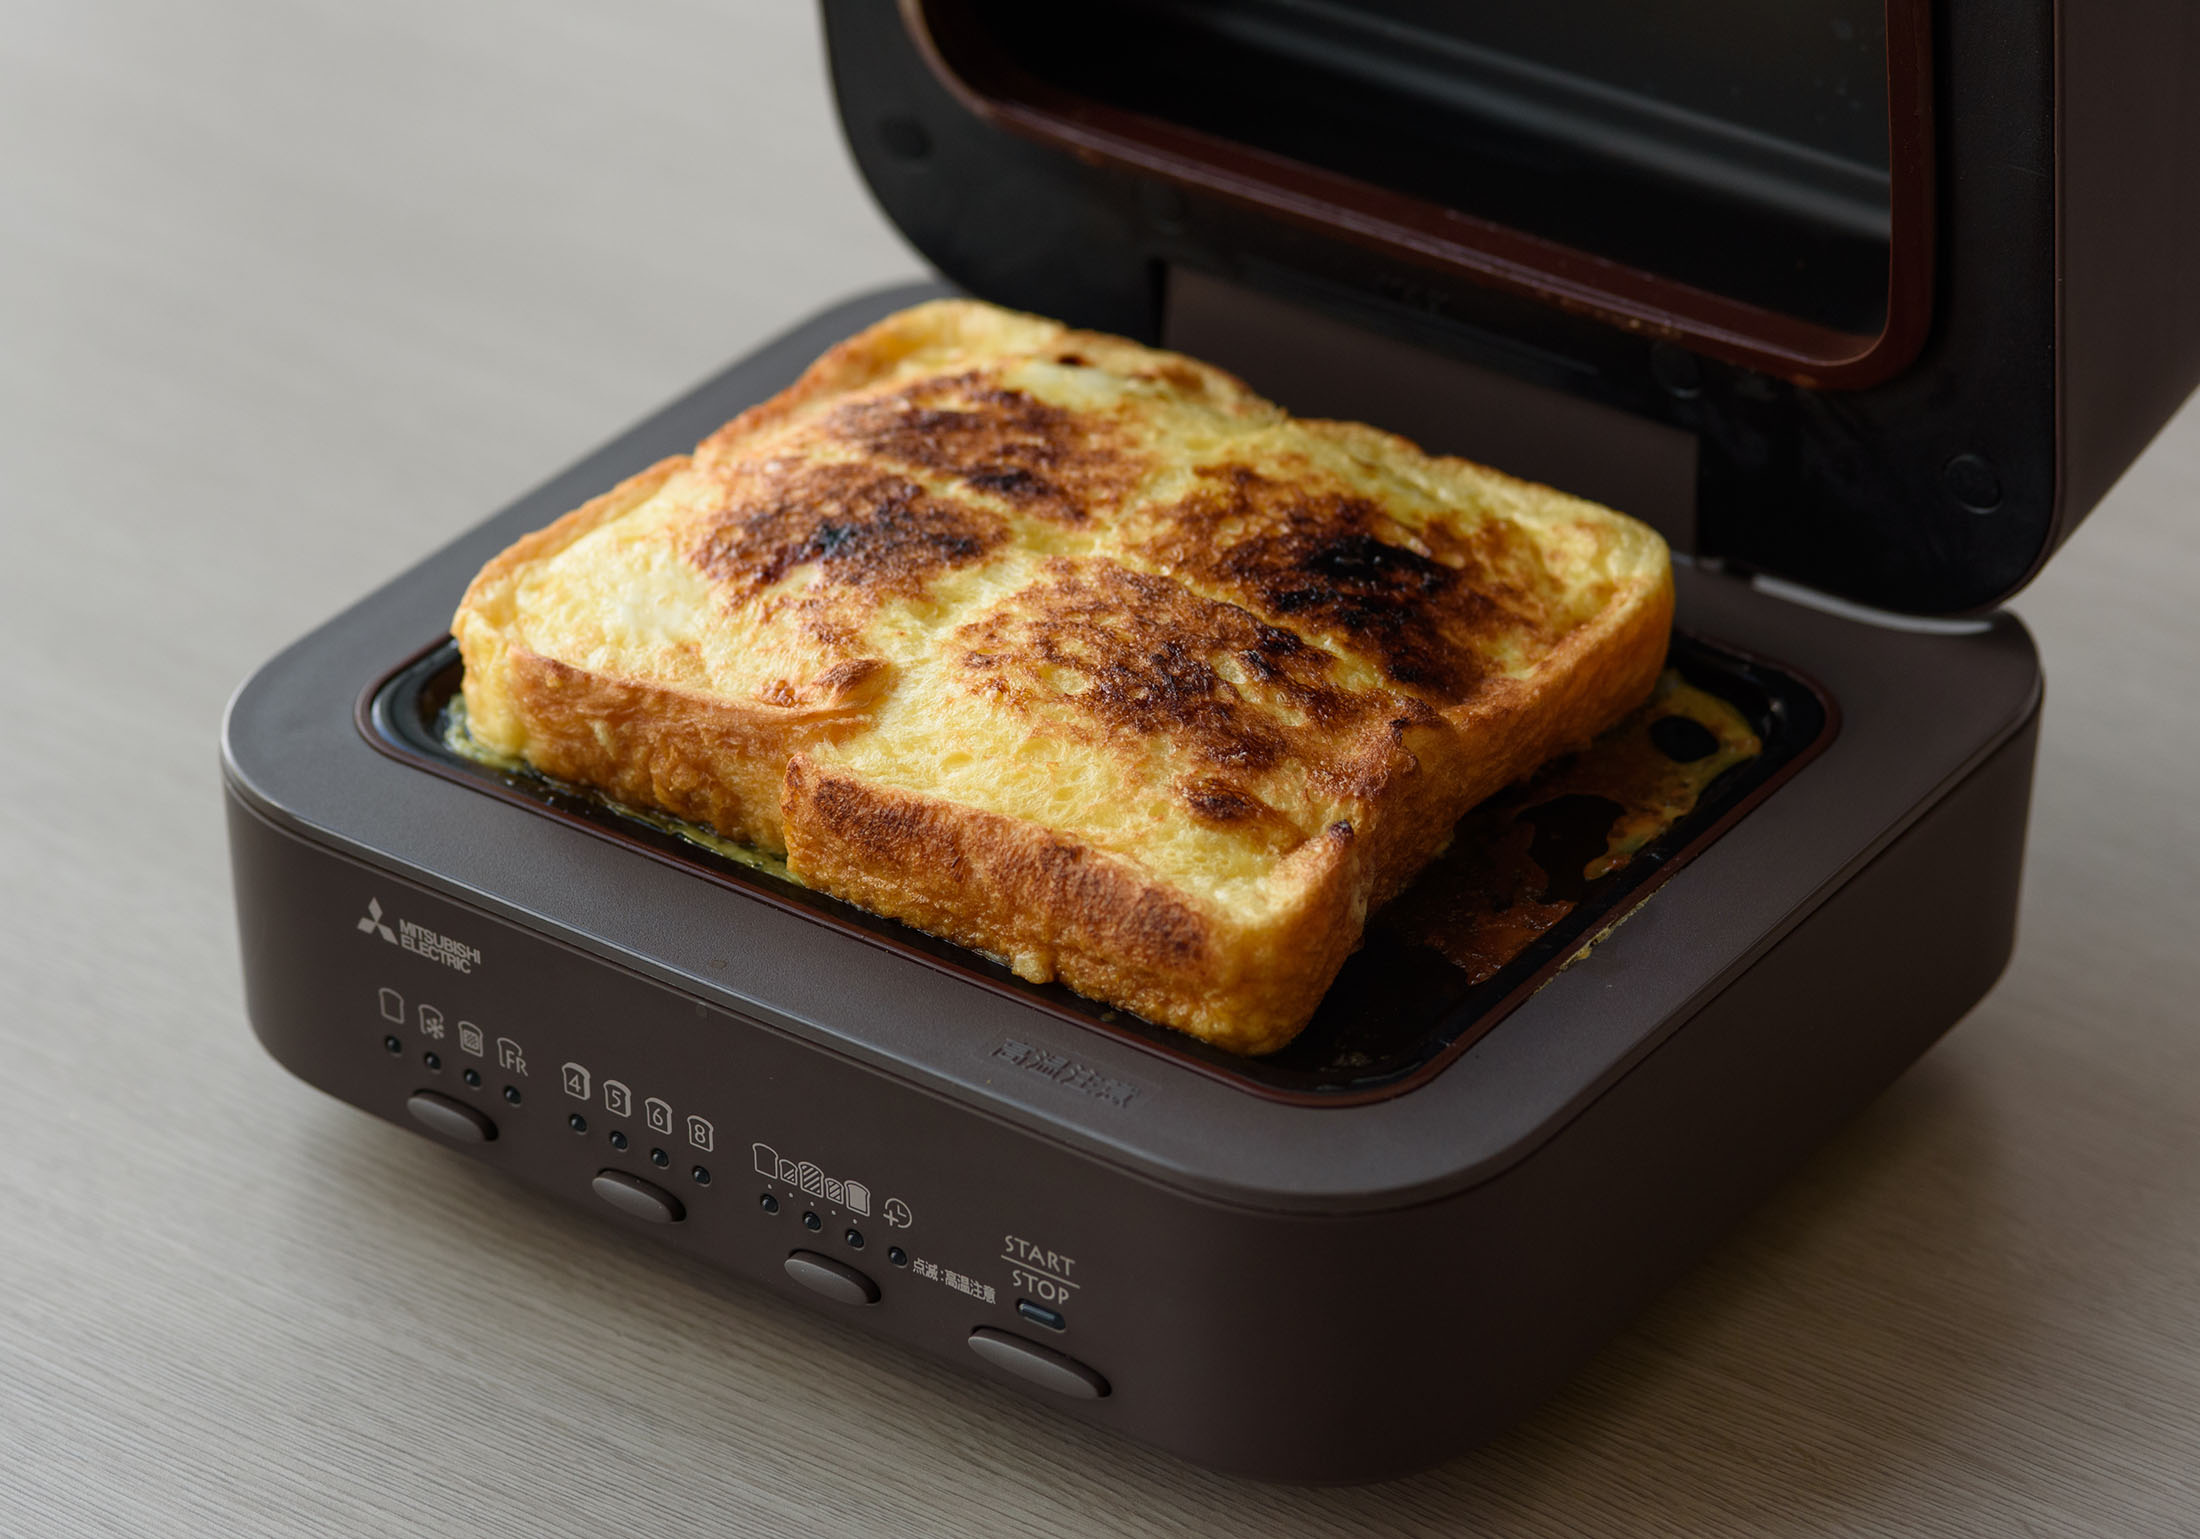 Creative Japan finds a hundred uses for humble oven toaster